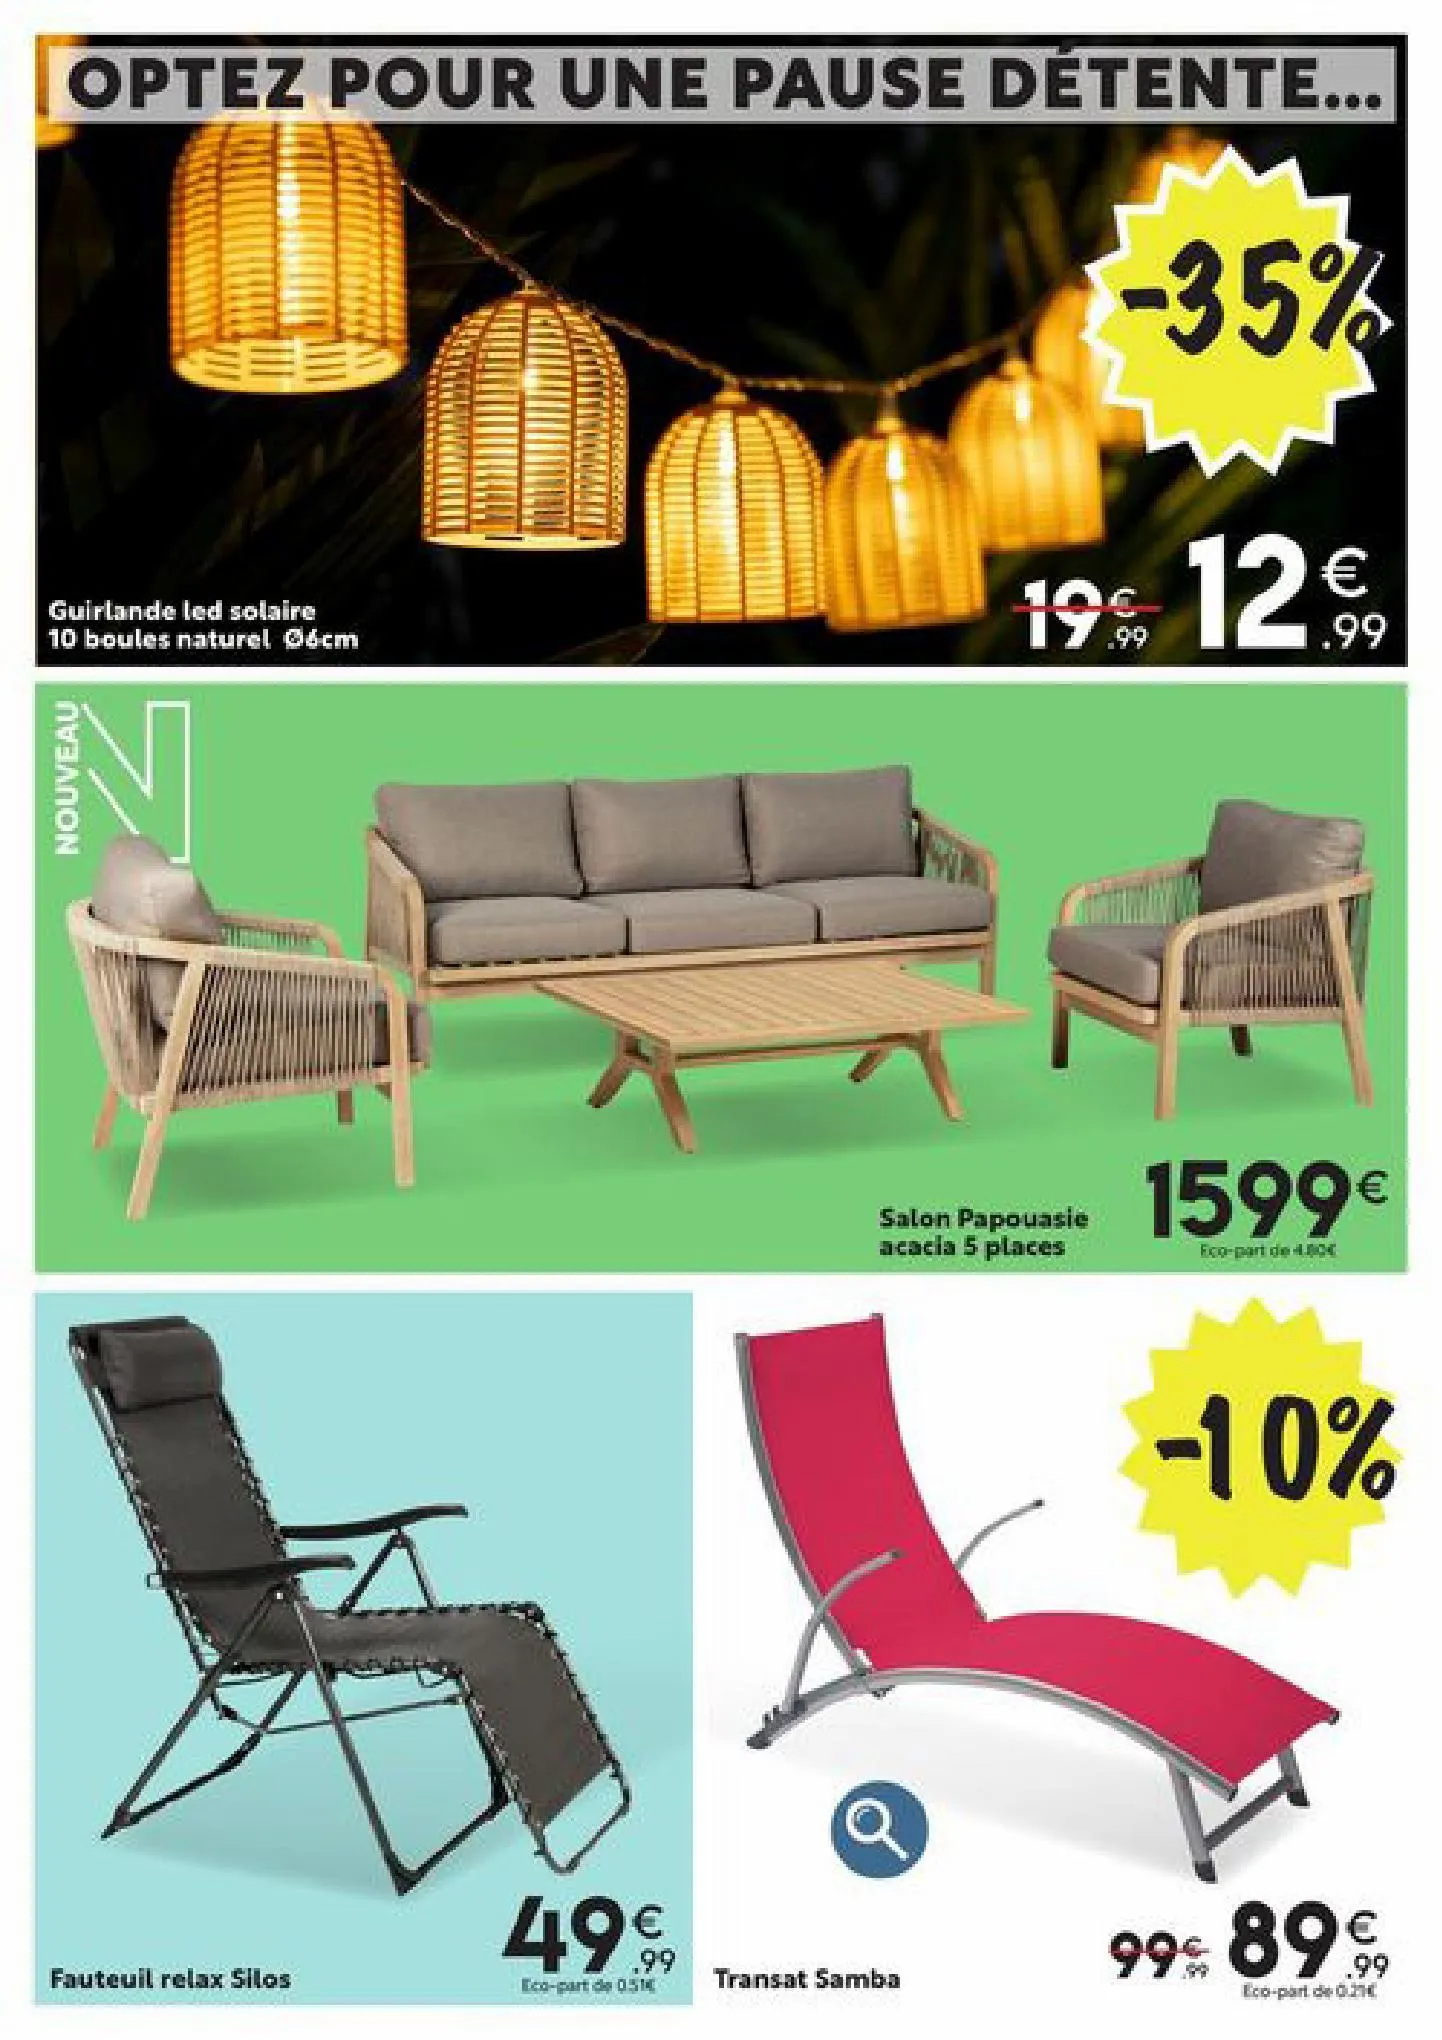 Catalogue DYA Shopping offres, page 00012